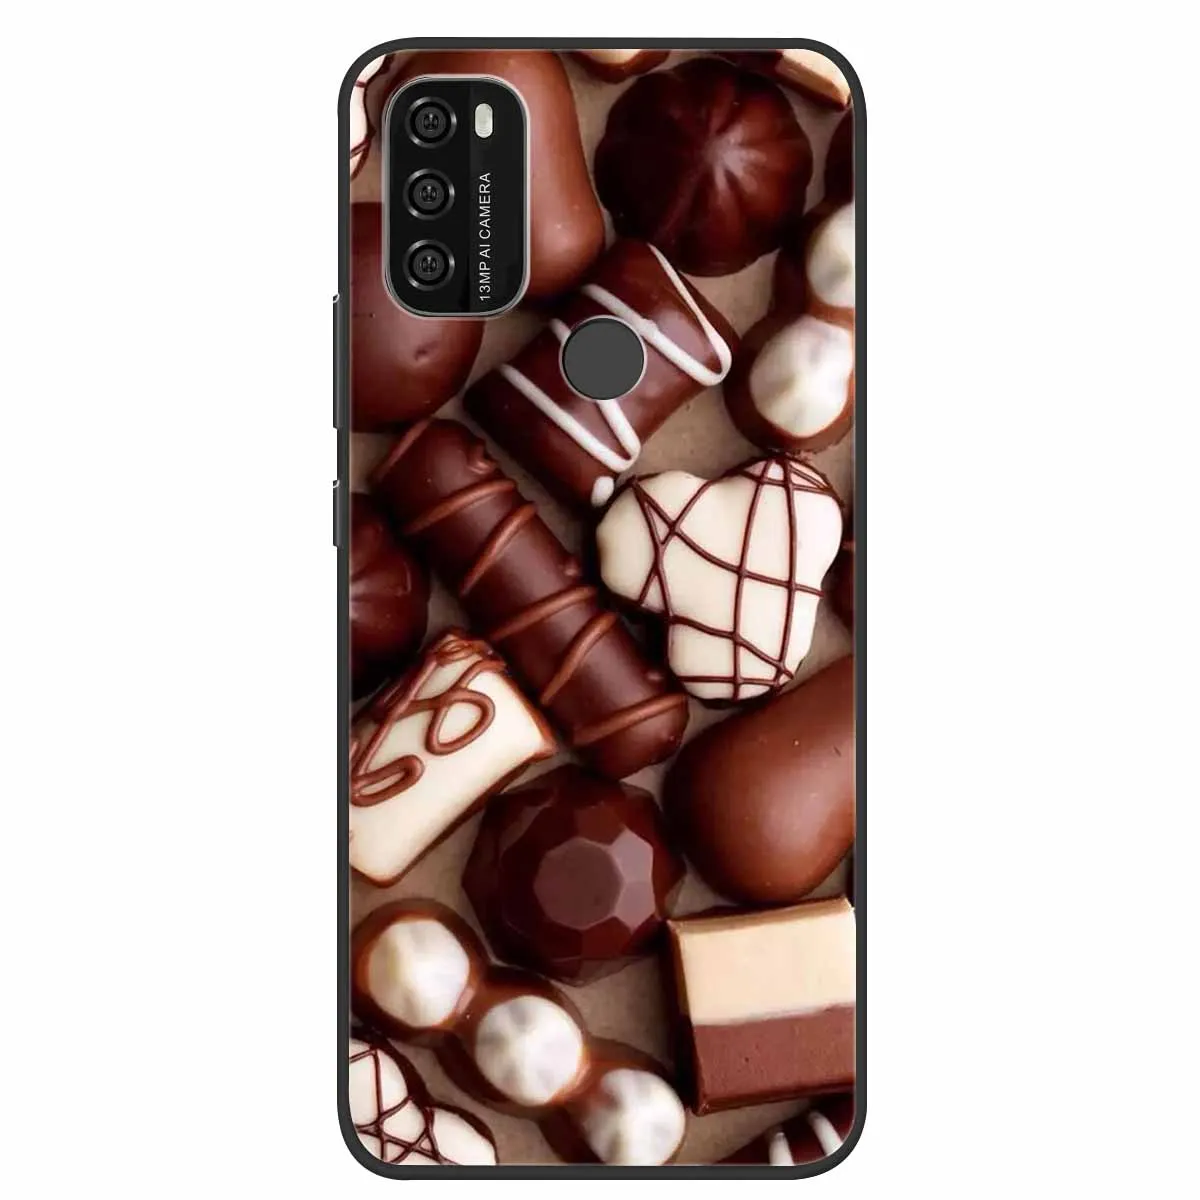 For Blackview A70 Case Luxury Bumper Silicone TPU Soft Cover Phone Case For Blackview A 70 Shockproof Cute Case Fundas Coque neck pouch for phone